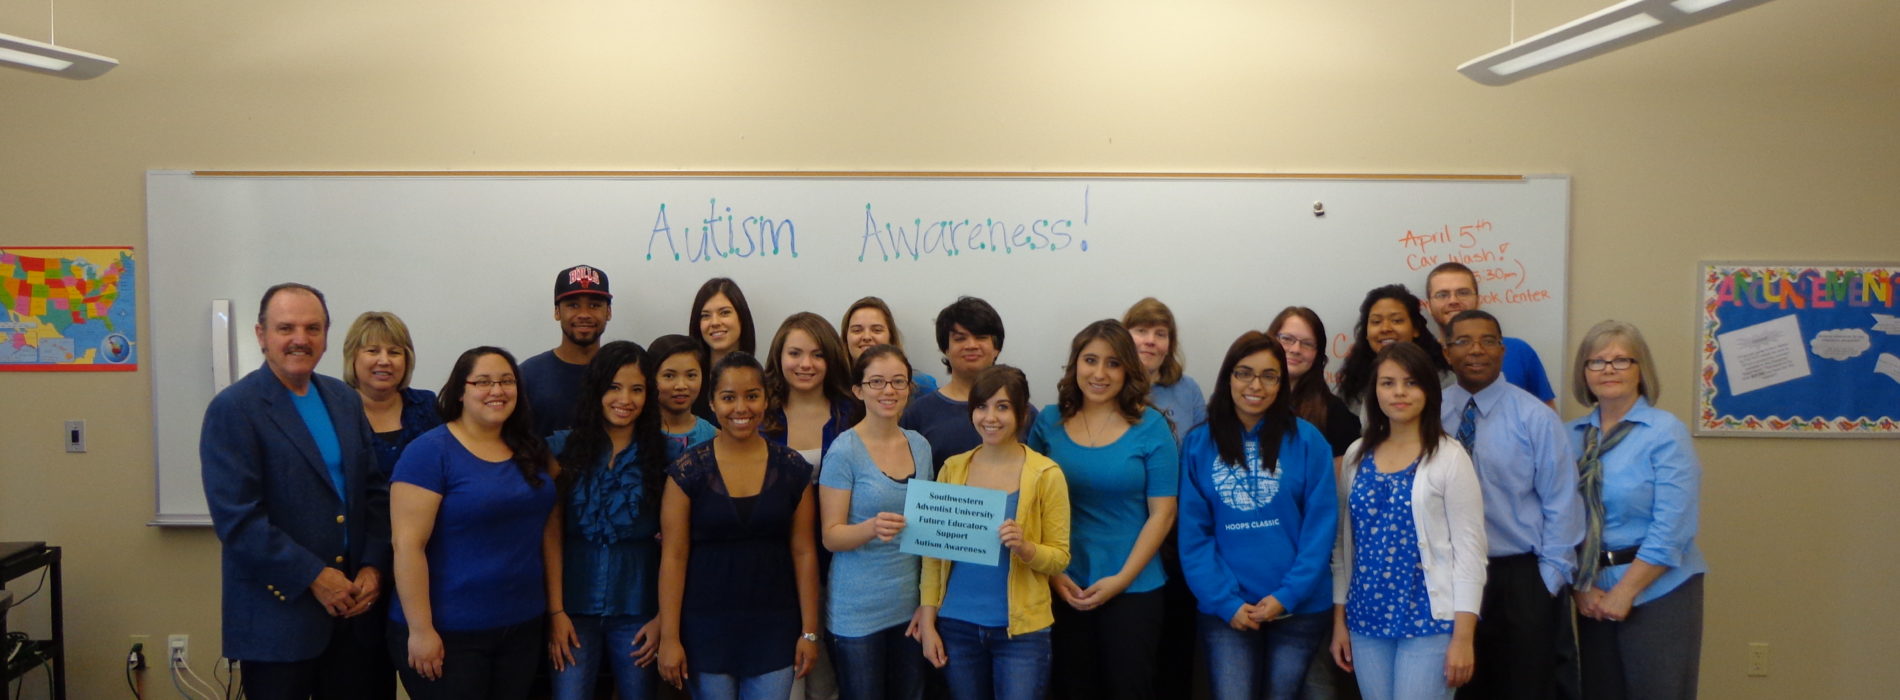 Education Observes Autism Awareness Month